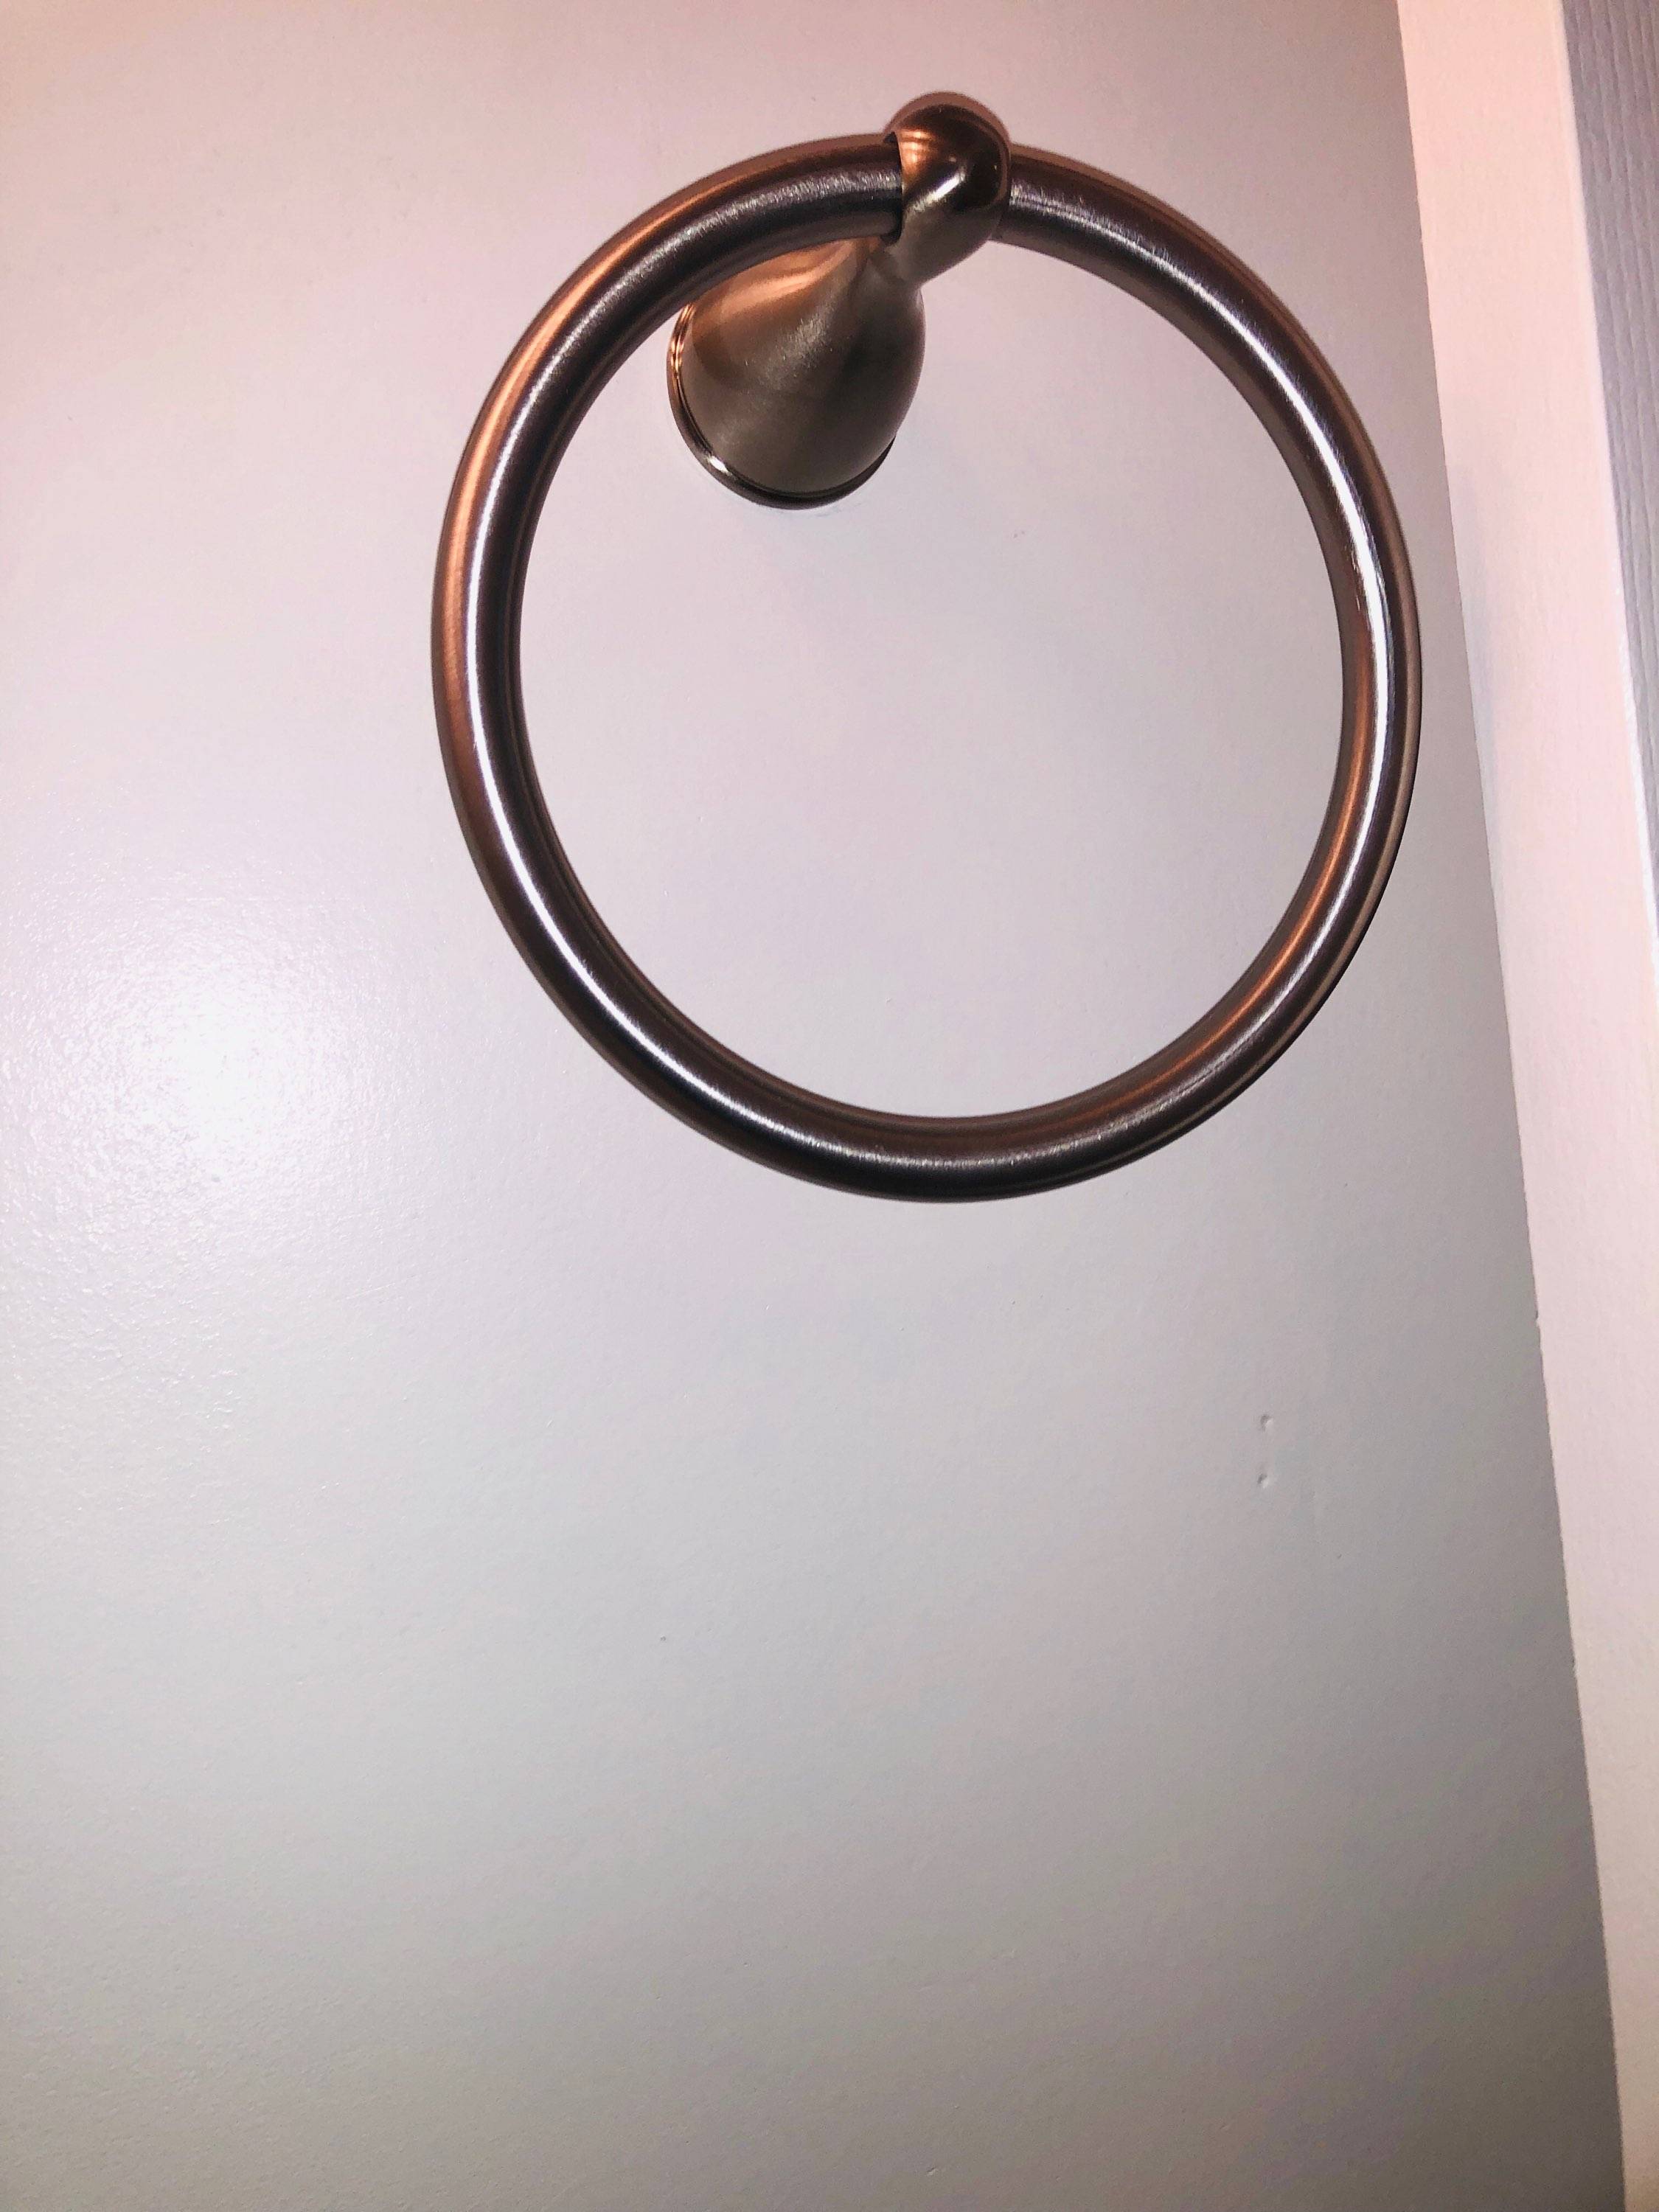 Installed towel ring